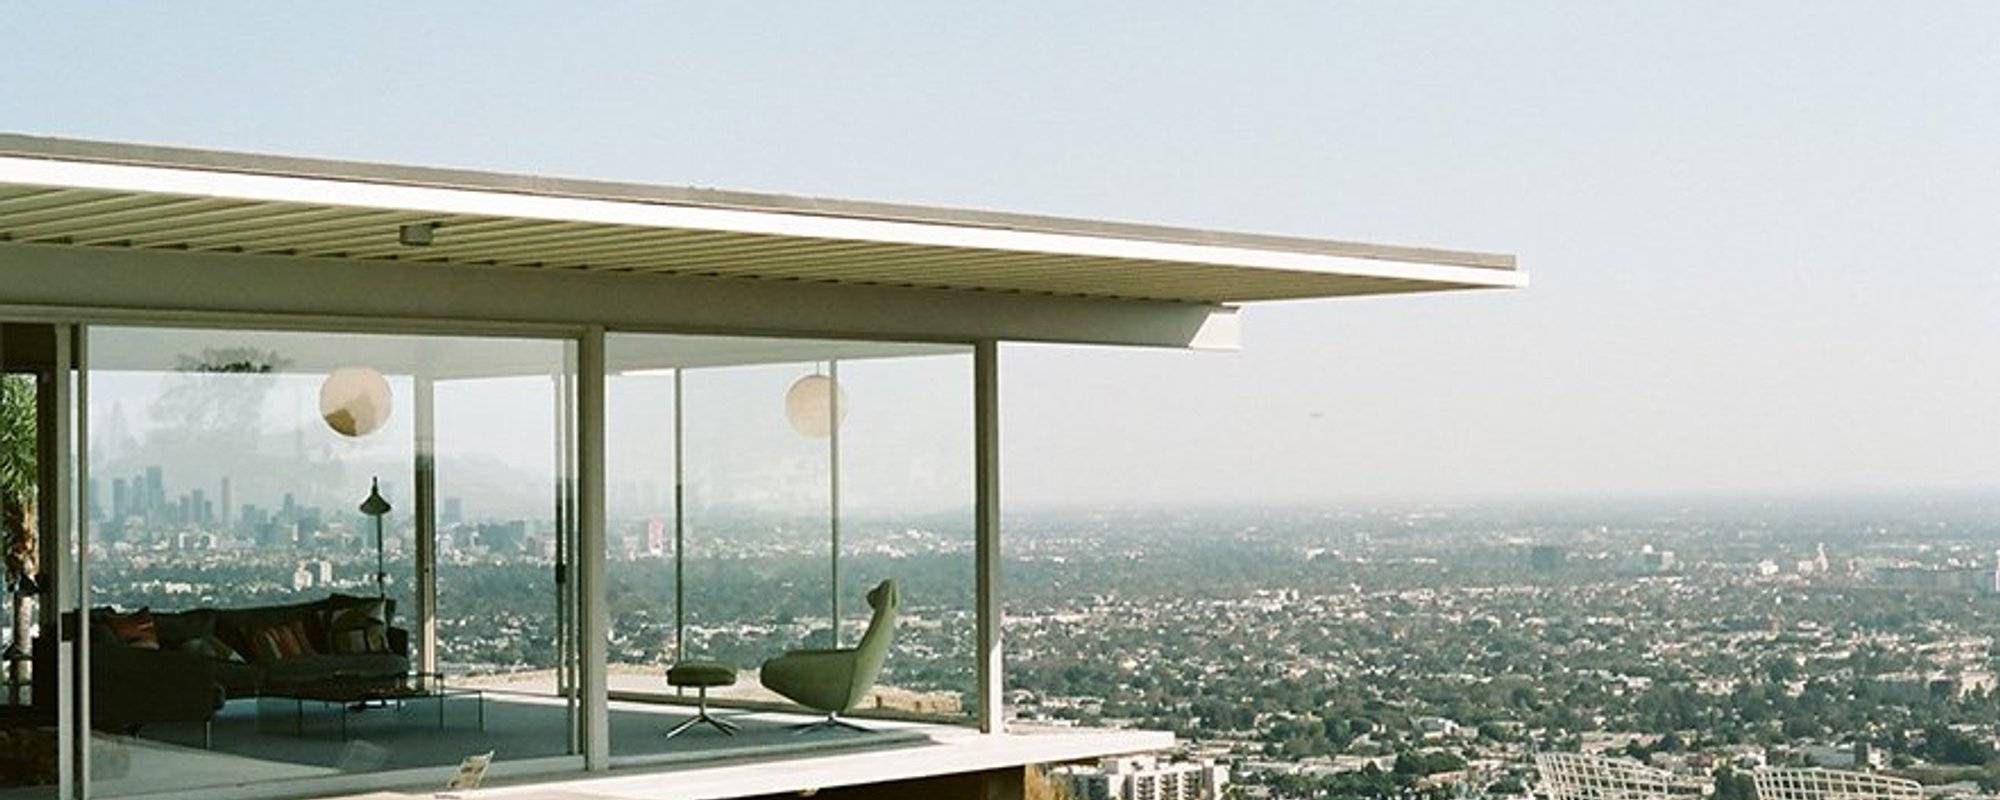 Exploring Los Angeles - A Visit to the Stahl House by Pierre Koenig